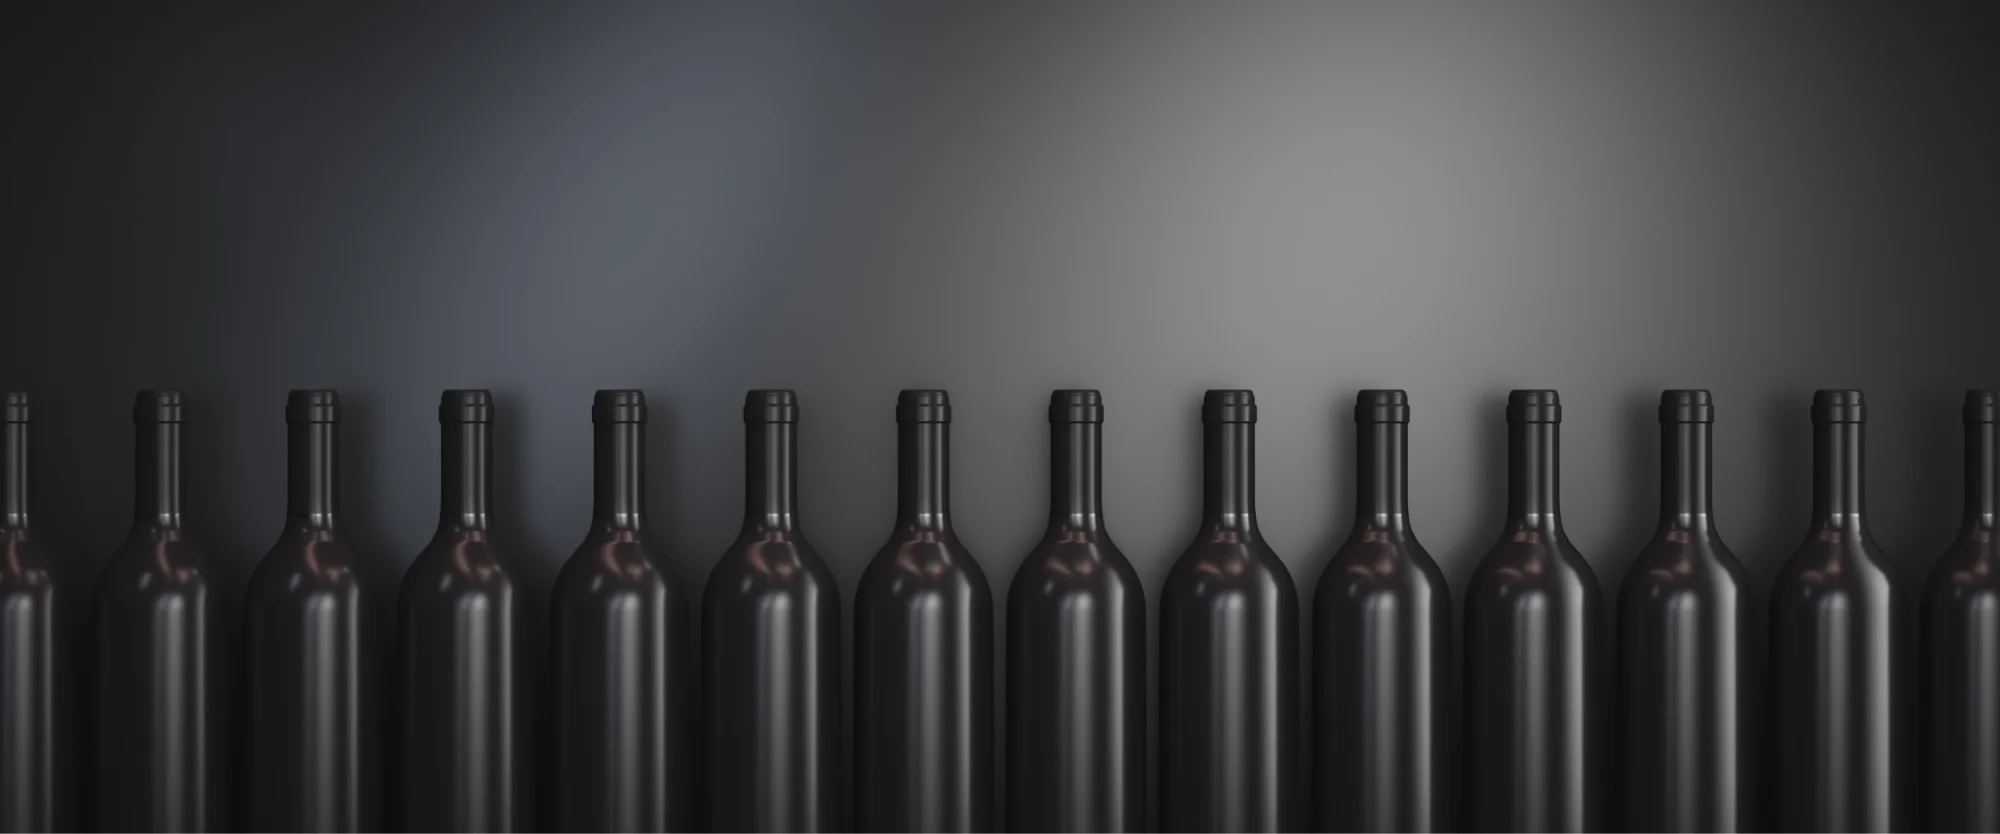 Shipping-brewing-systems-row-of-wine-bottles